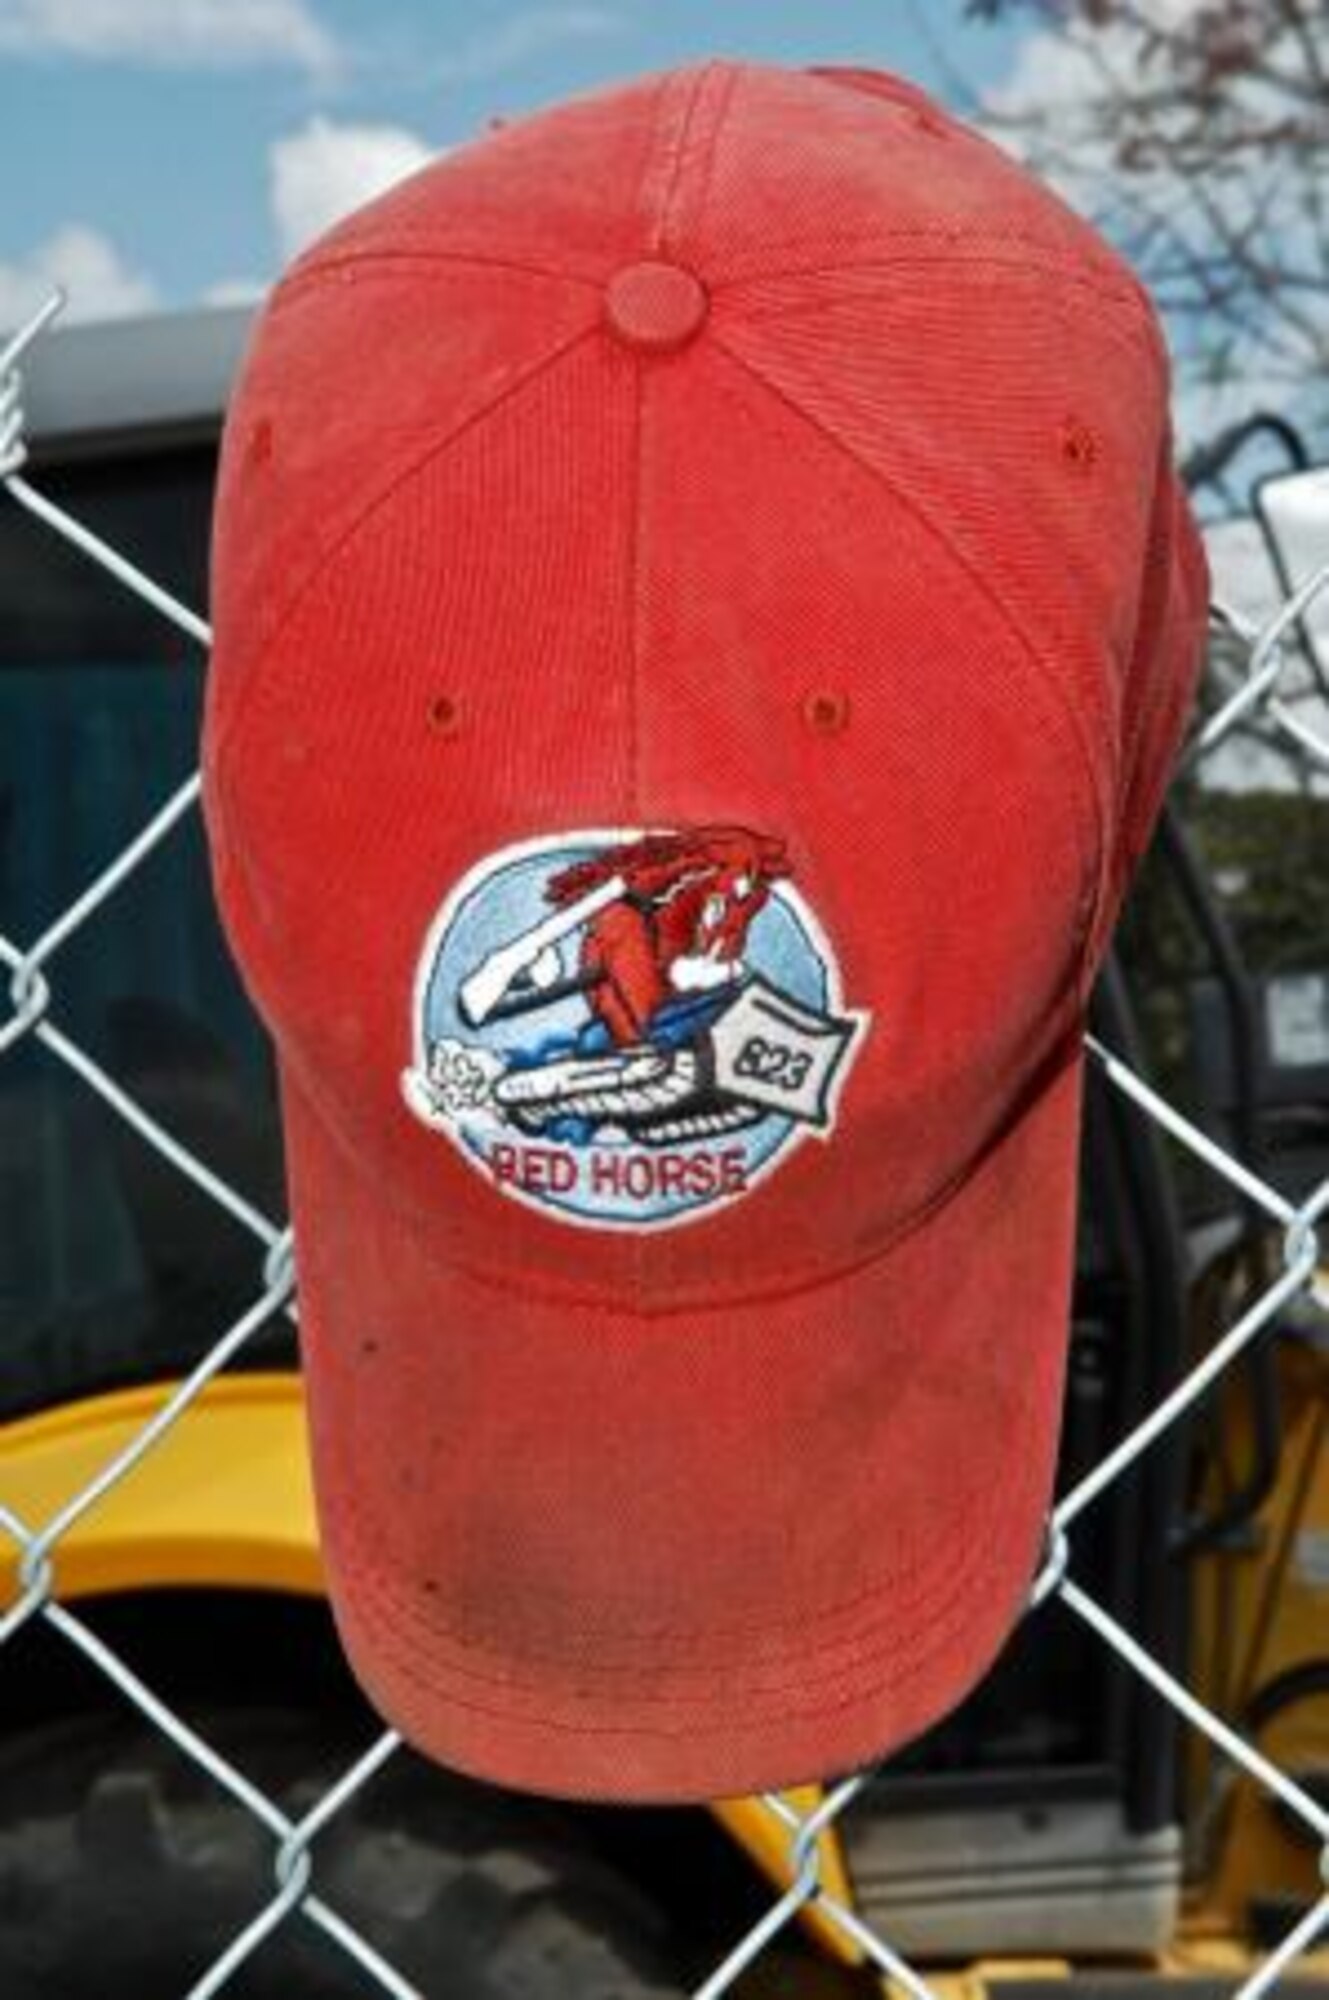 An 823rd Rapid Engineer Deployable Heavy Operational Repair Squadron Engineers hat hangs on a fence at the Crooked Tree Government Primary School construction site. The red hat is a distinctive symbol worn by all RED HORSE airmen.
